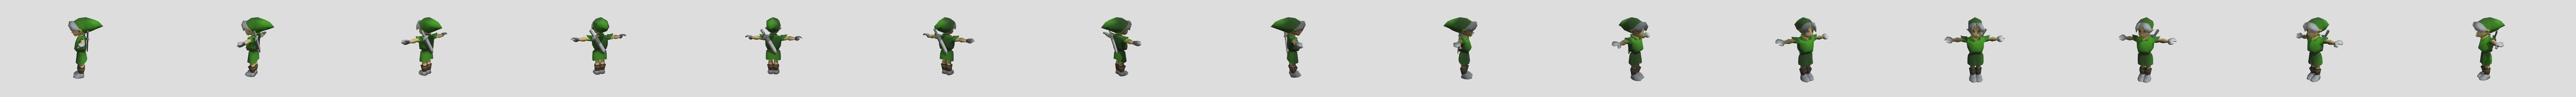 Ocarina Of Time Link - Download Free 3D model by coolbr63 (@coolbr63)  [b84268a]